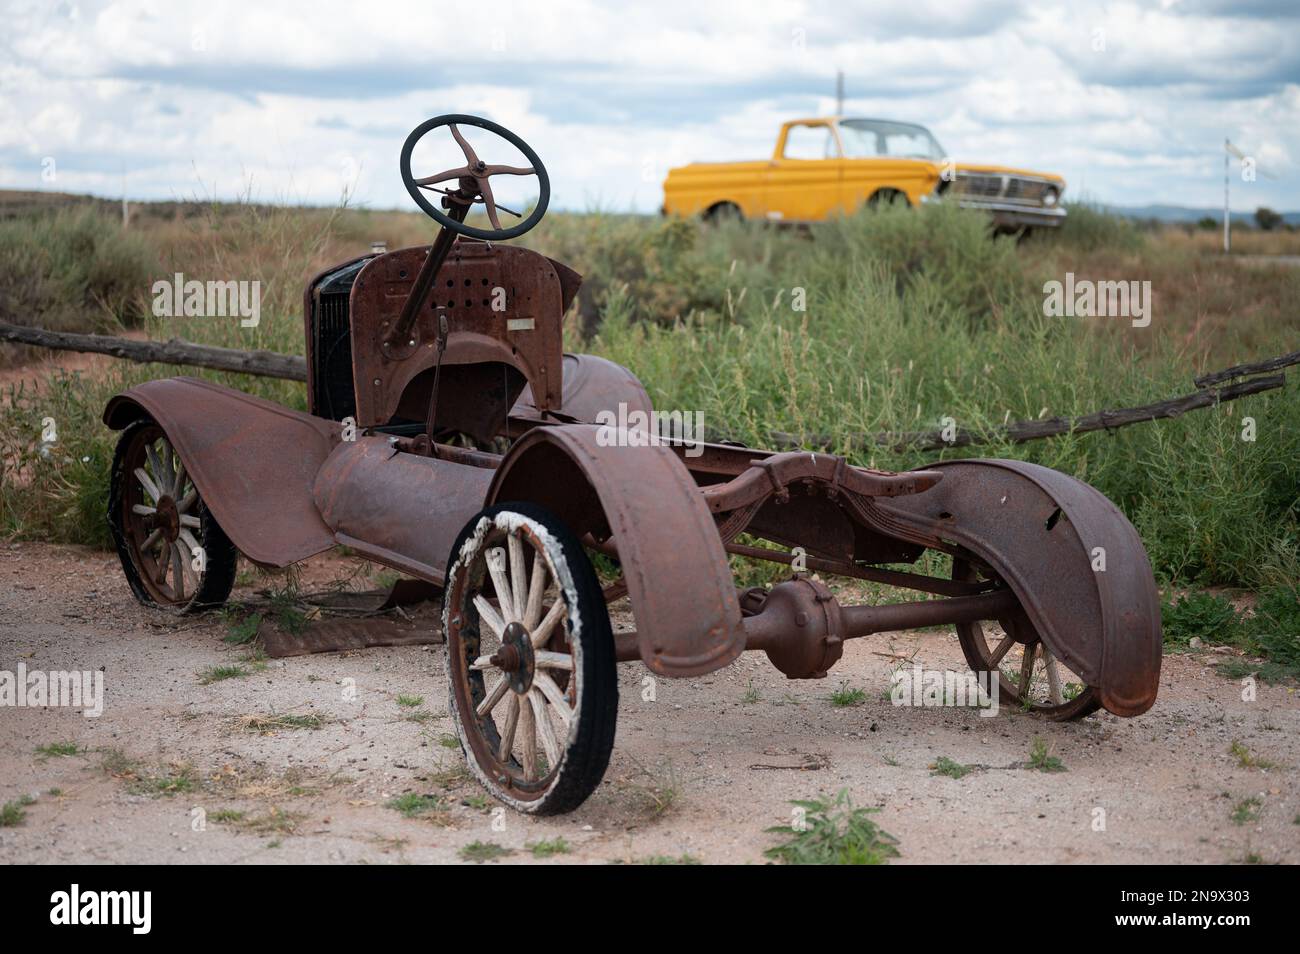 The remains of an old abandoned historic car, cannot be identified. Stock Photo